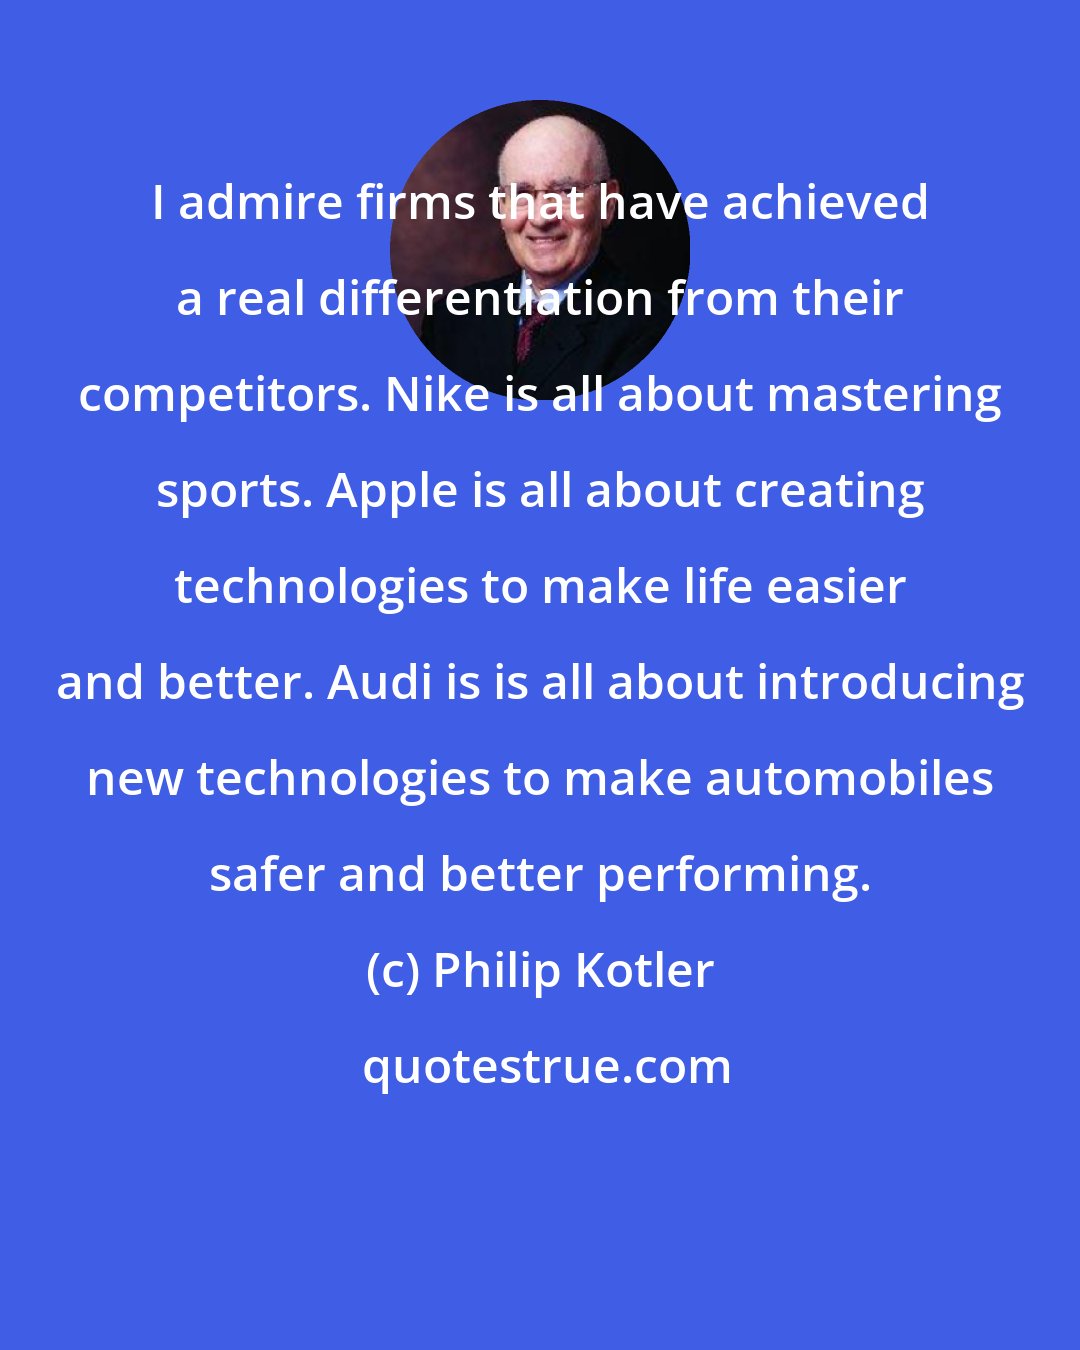 Philip Kotler: I admire firms that have achieved a real differentiation from their competitors. Nike is all about mastering sports. Apple is all about creating technologies to make life easier and better. Audi is is all about introducing new technologies to make automobiles safer and better performing.